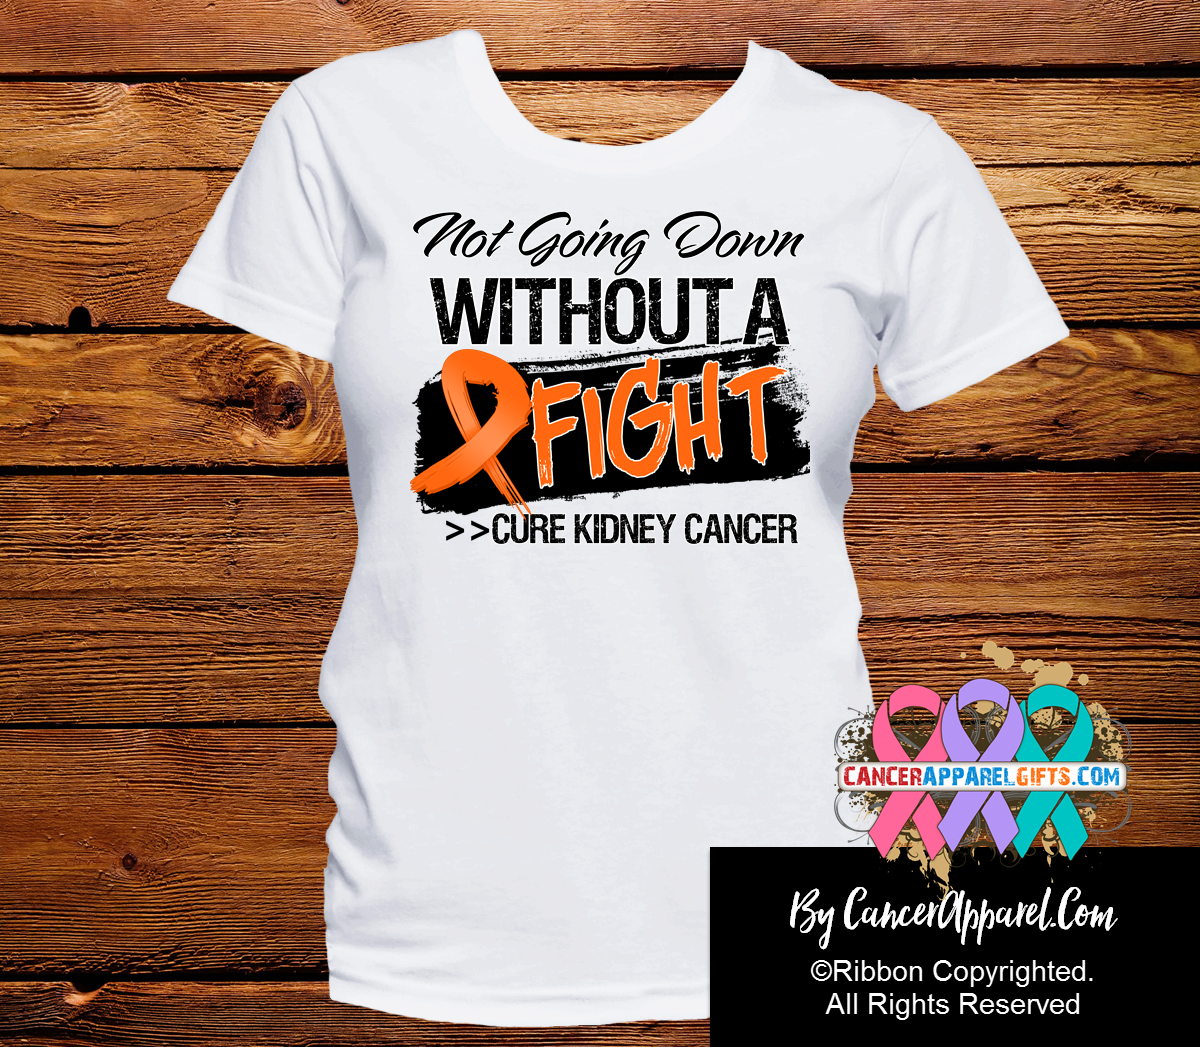 Kidney Cancer Not Going Down Without a Fight Shirts - Cancer Apparel and Gifts